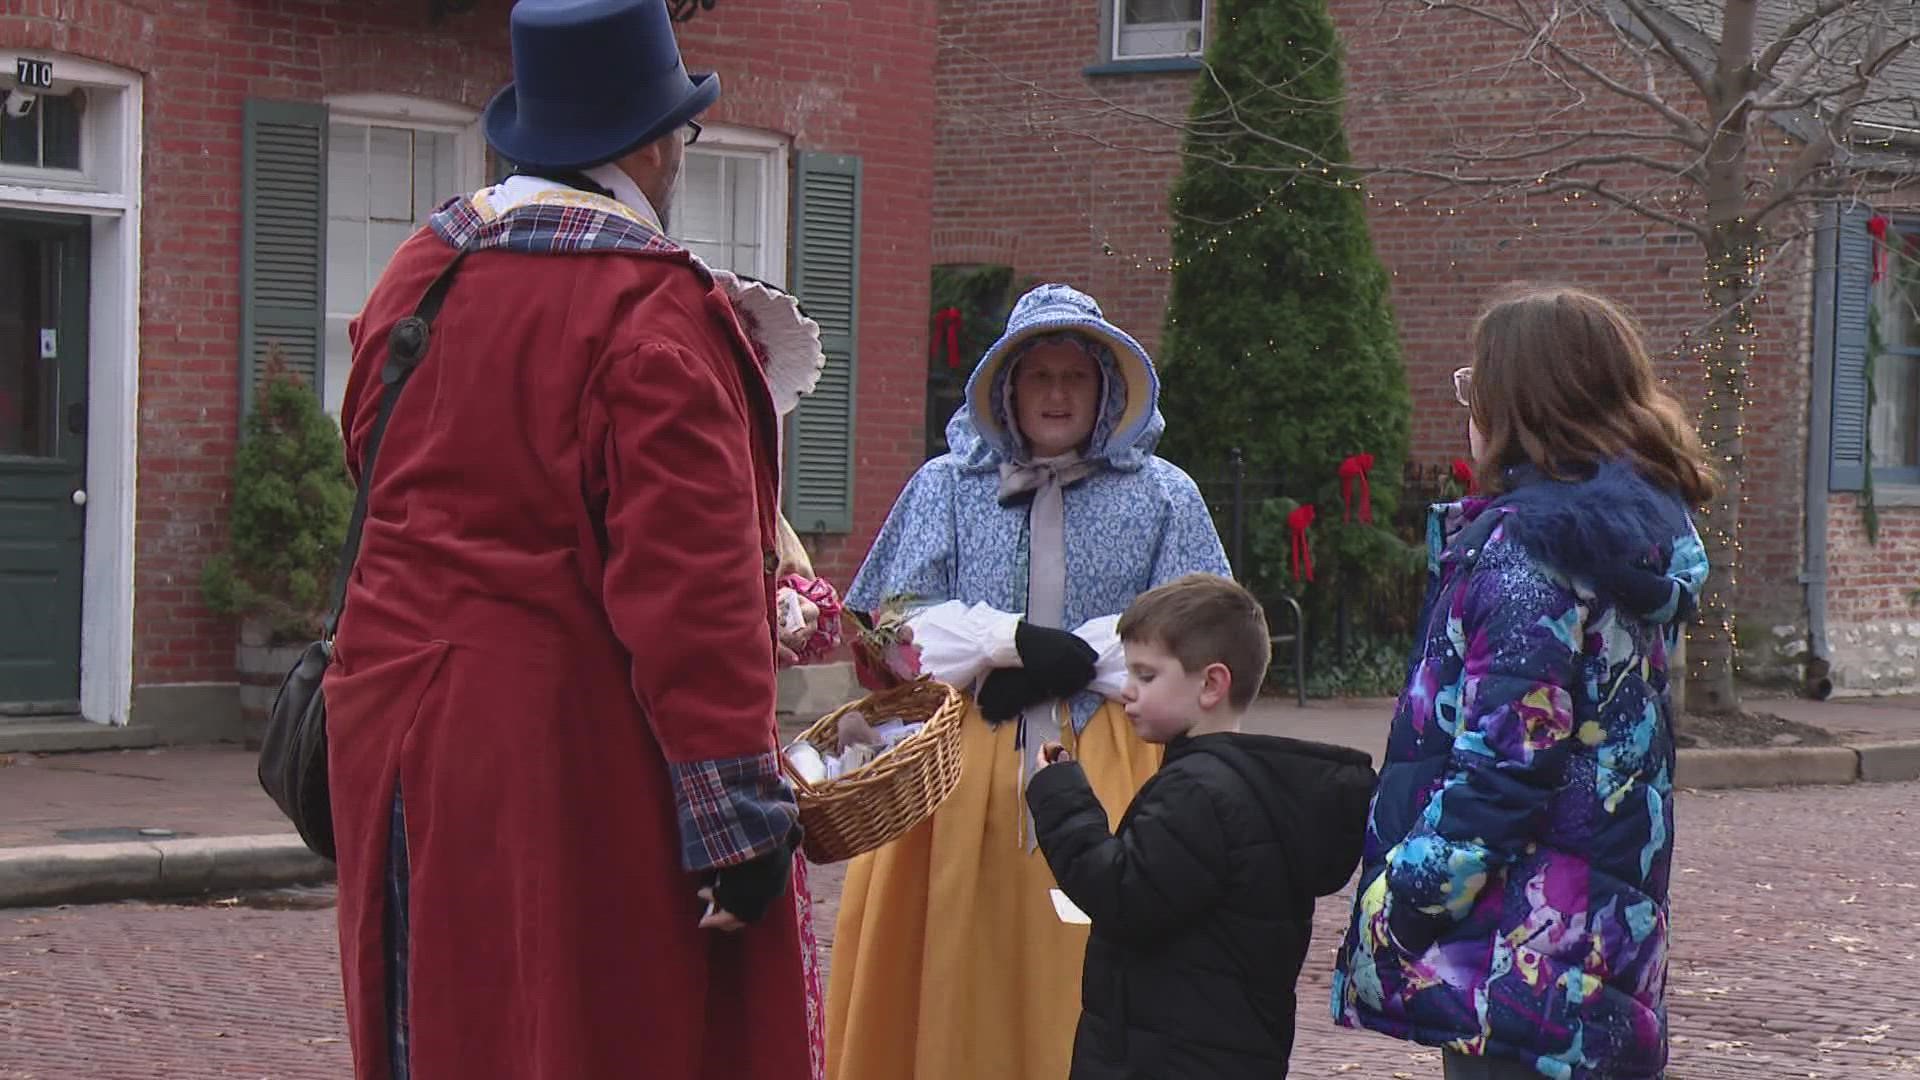 Enjoy unique storytelling, history and a holiday feast at the St. Charles Christmas Traditions. They are open now through Dec. 24.